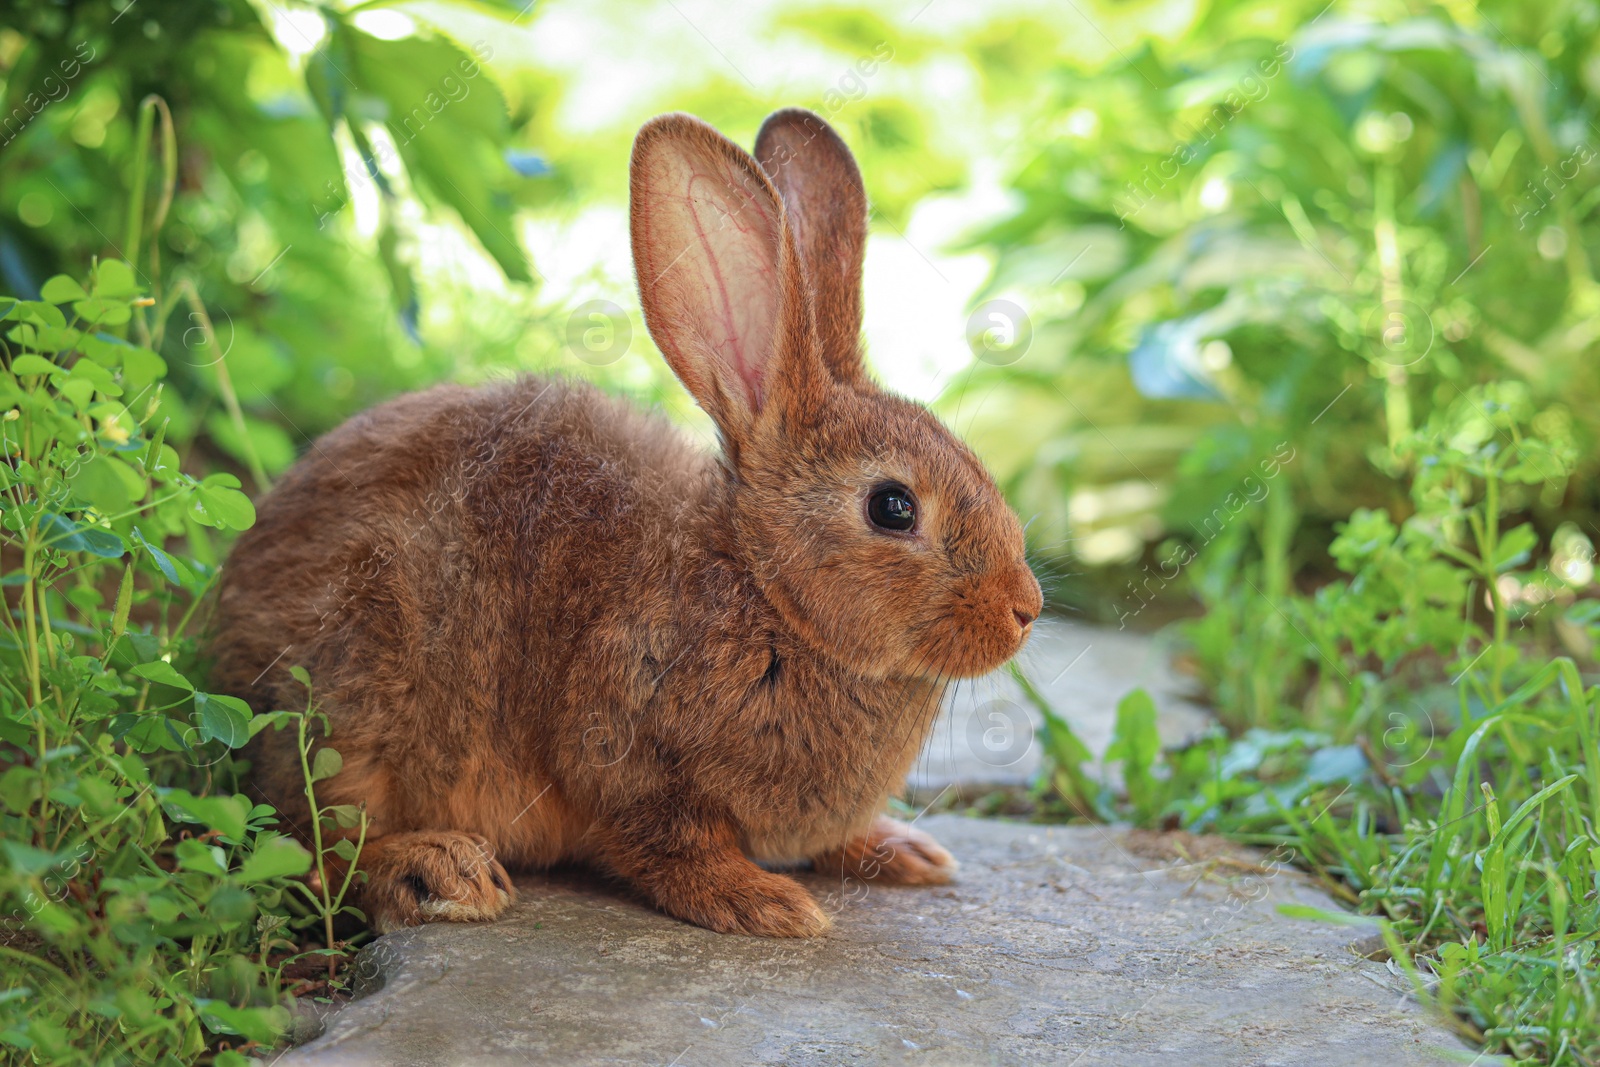 Photo of Cute fluffy rabbit on paved path in garden